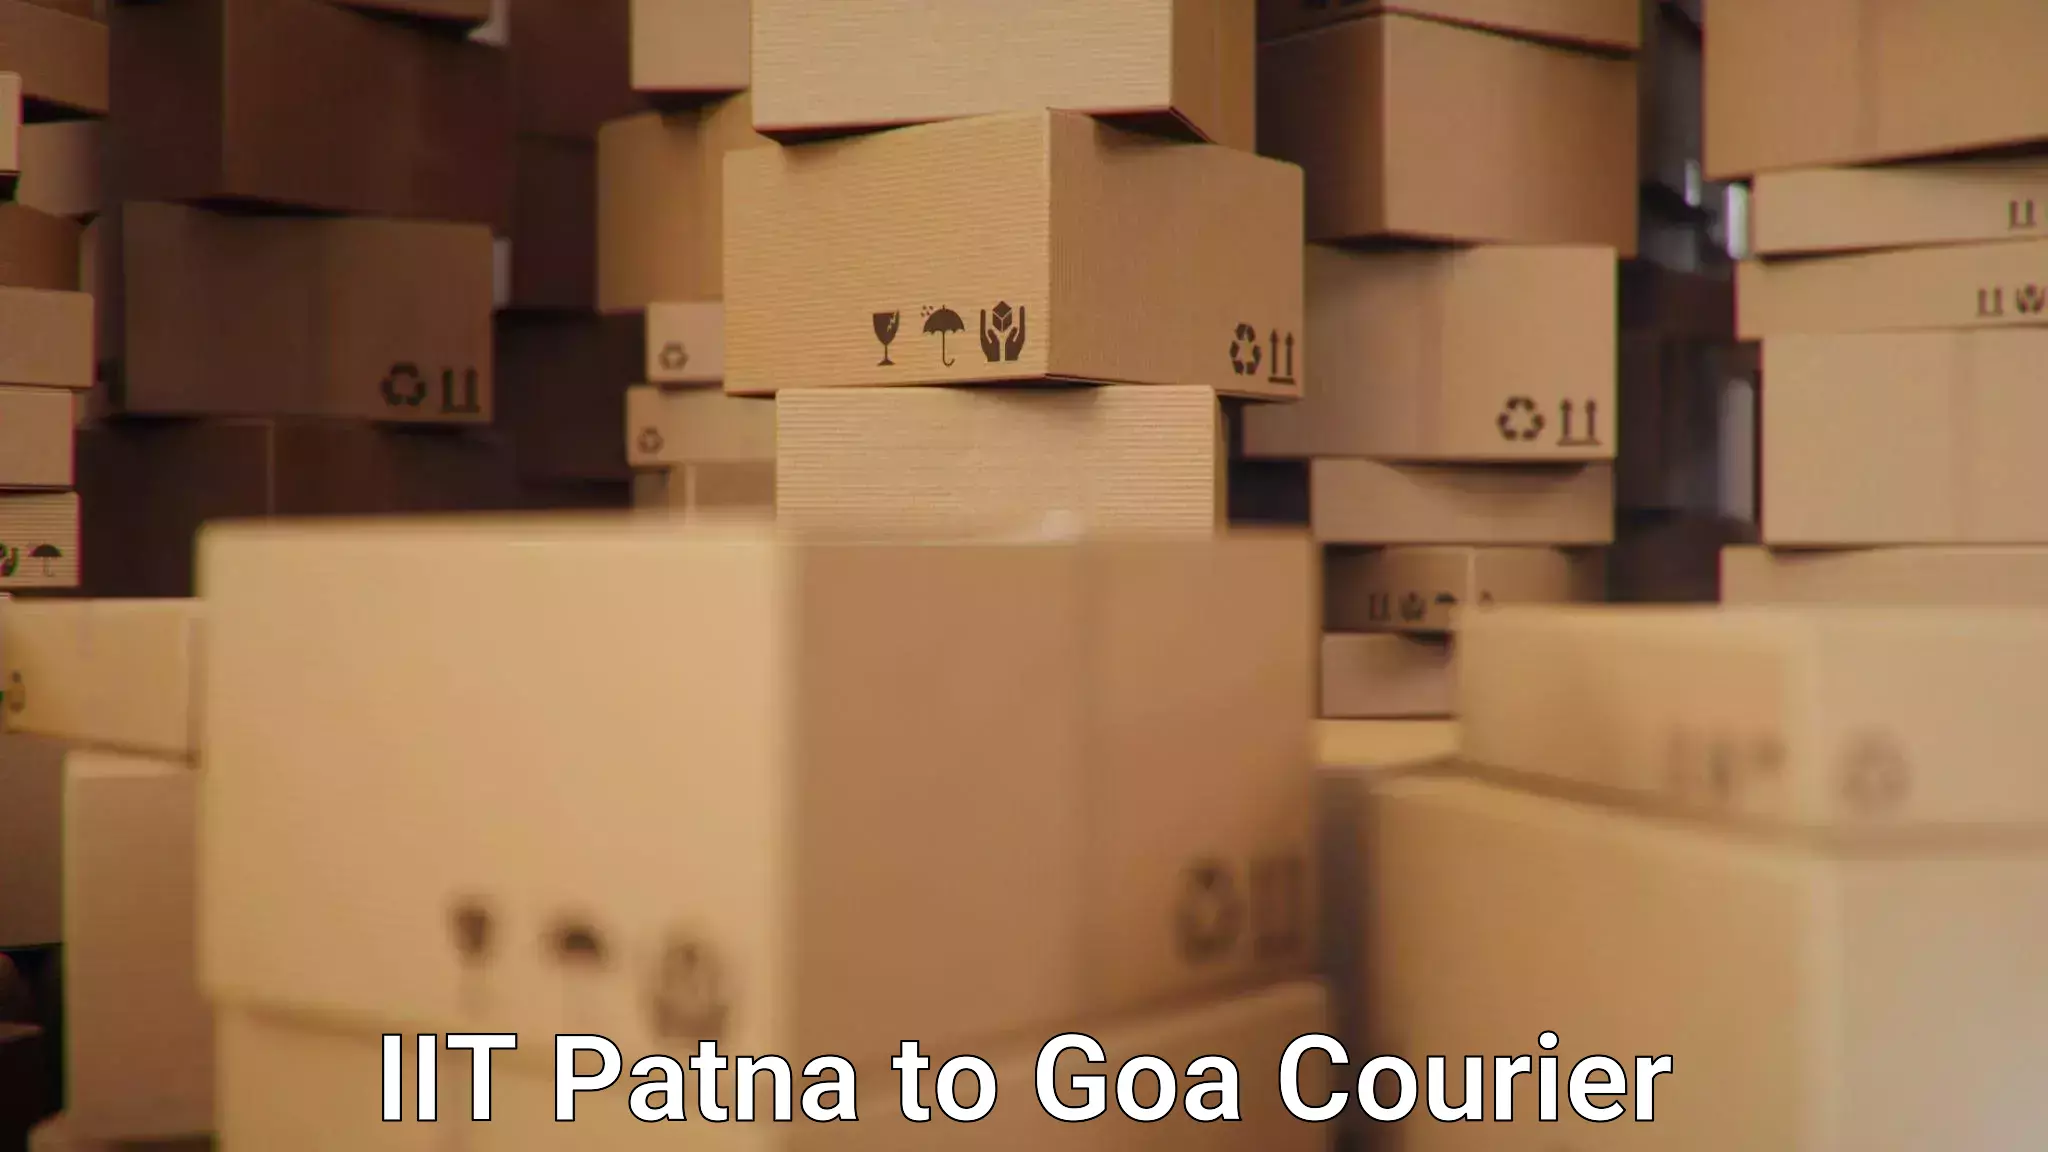 Easy access courier services IIT Patna to South Goa